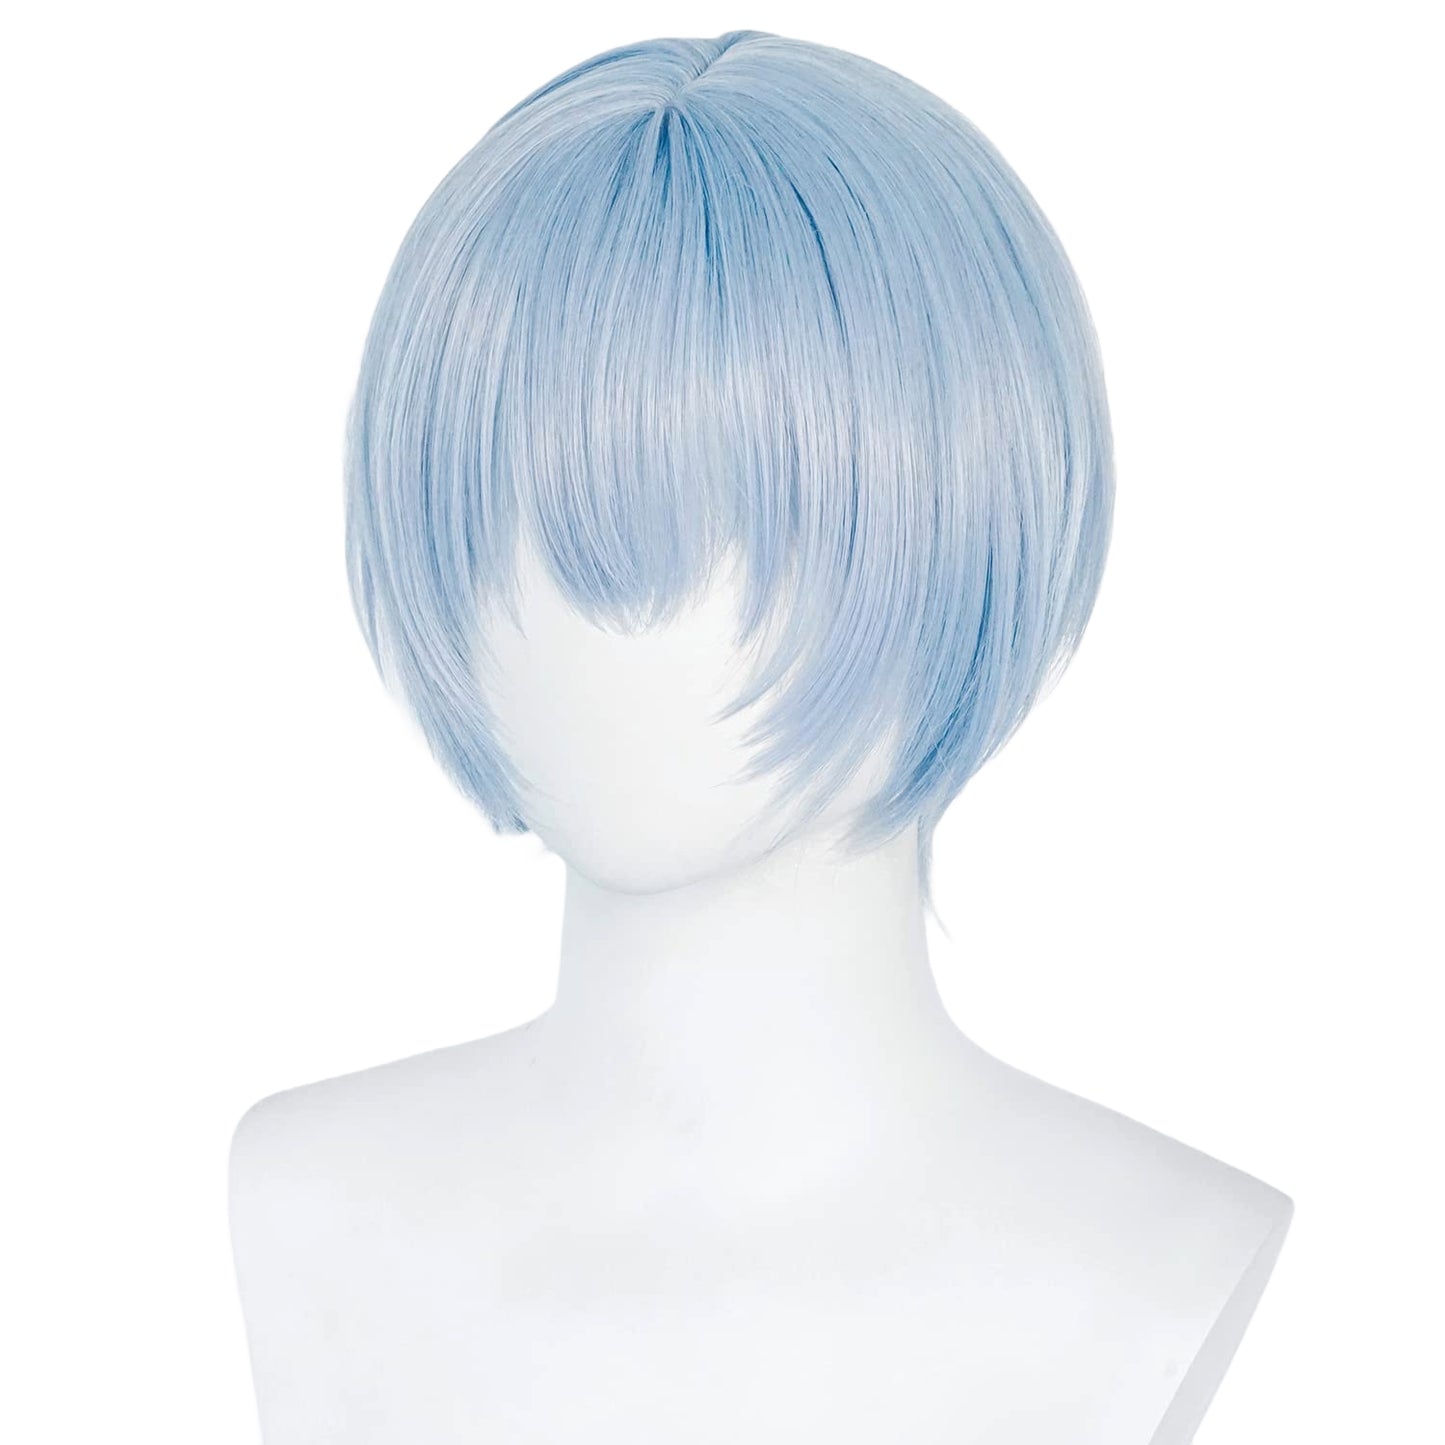 Cosplay Rei Ayanami in Style with Our Ice Blue Wig - Morojowig